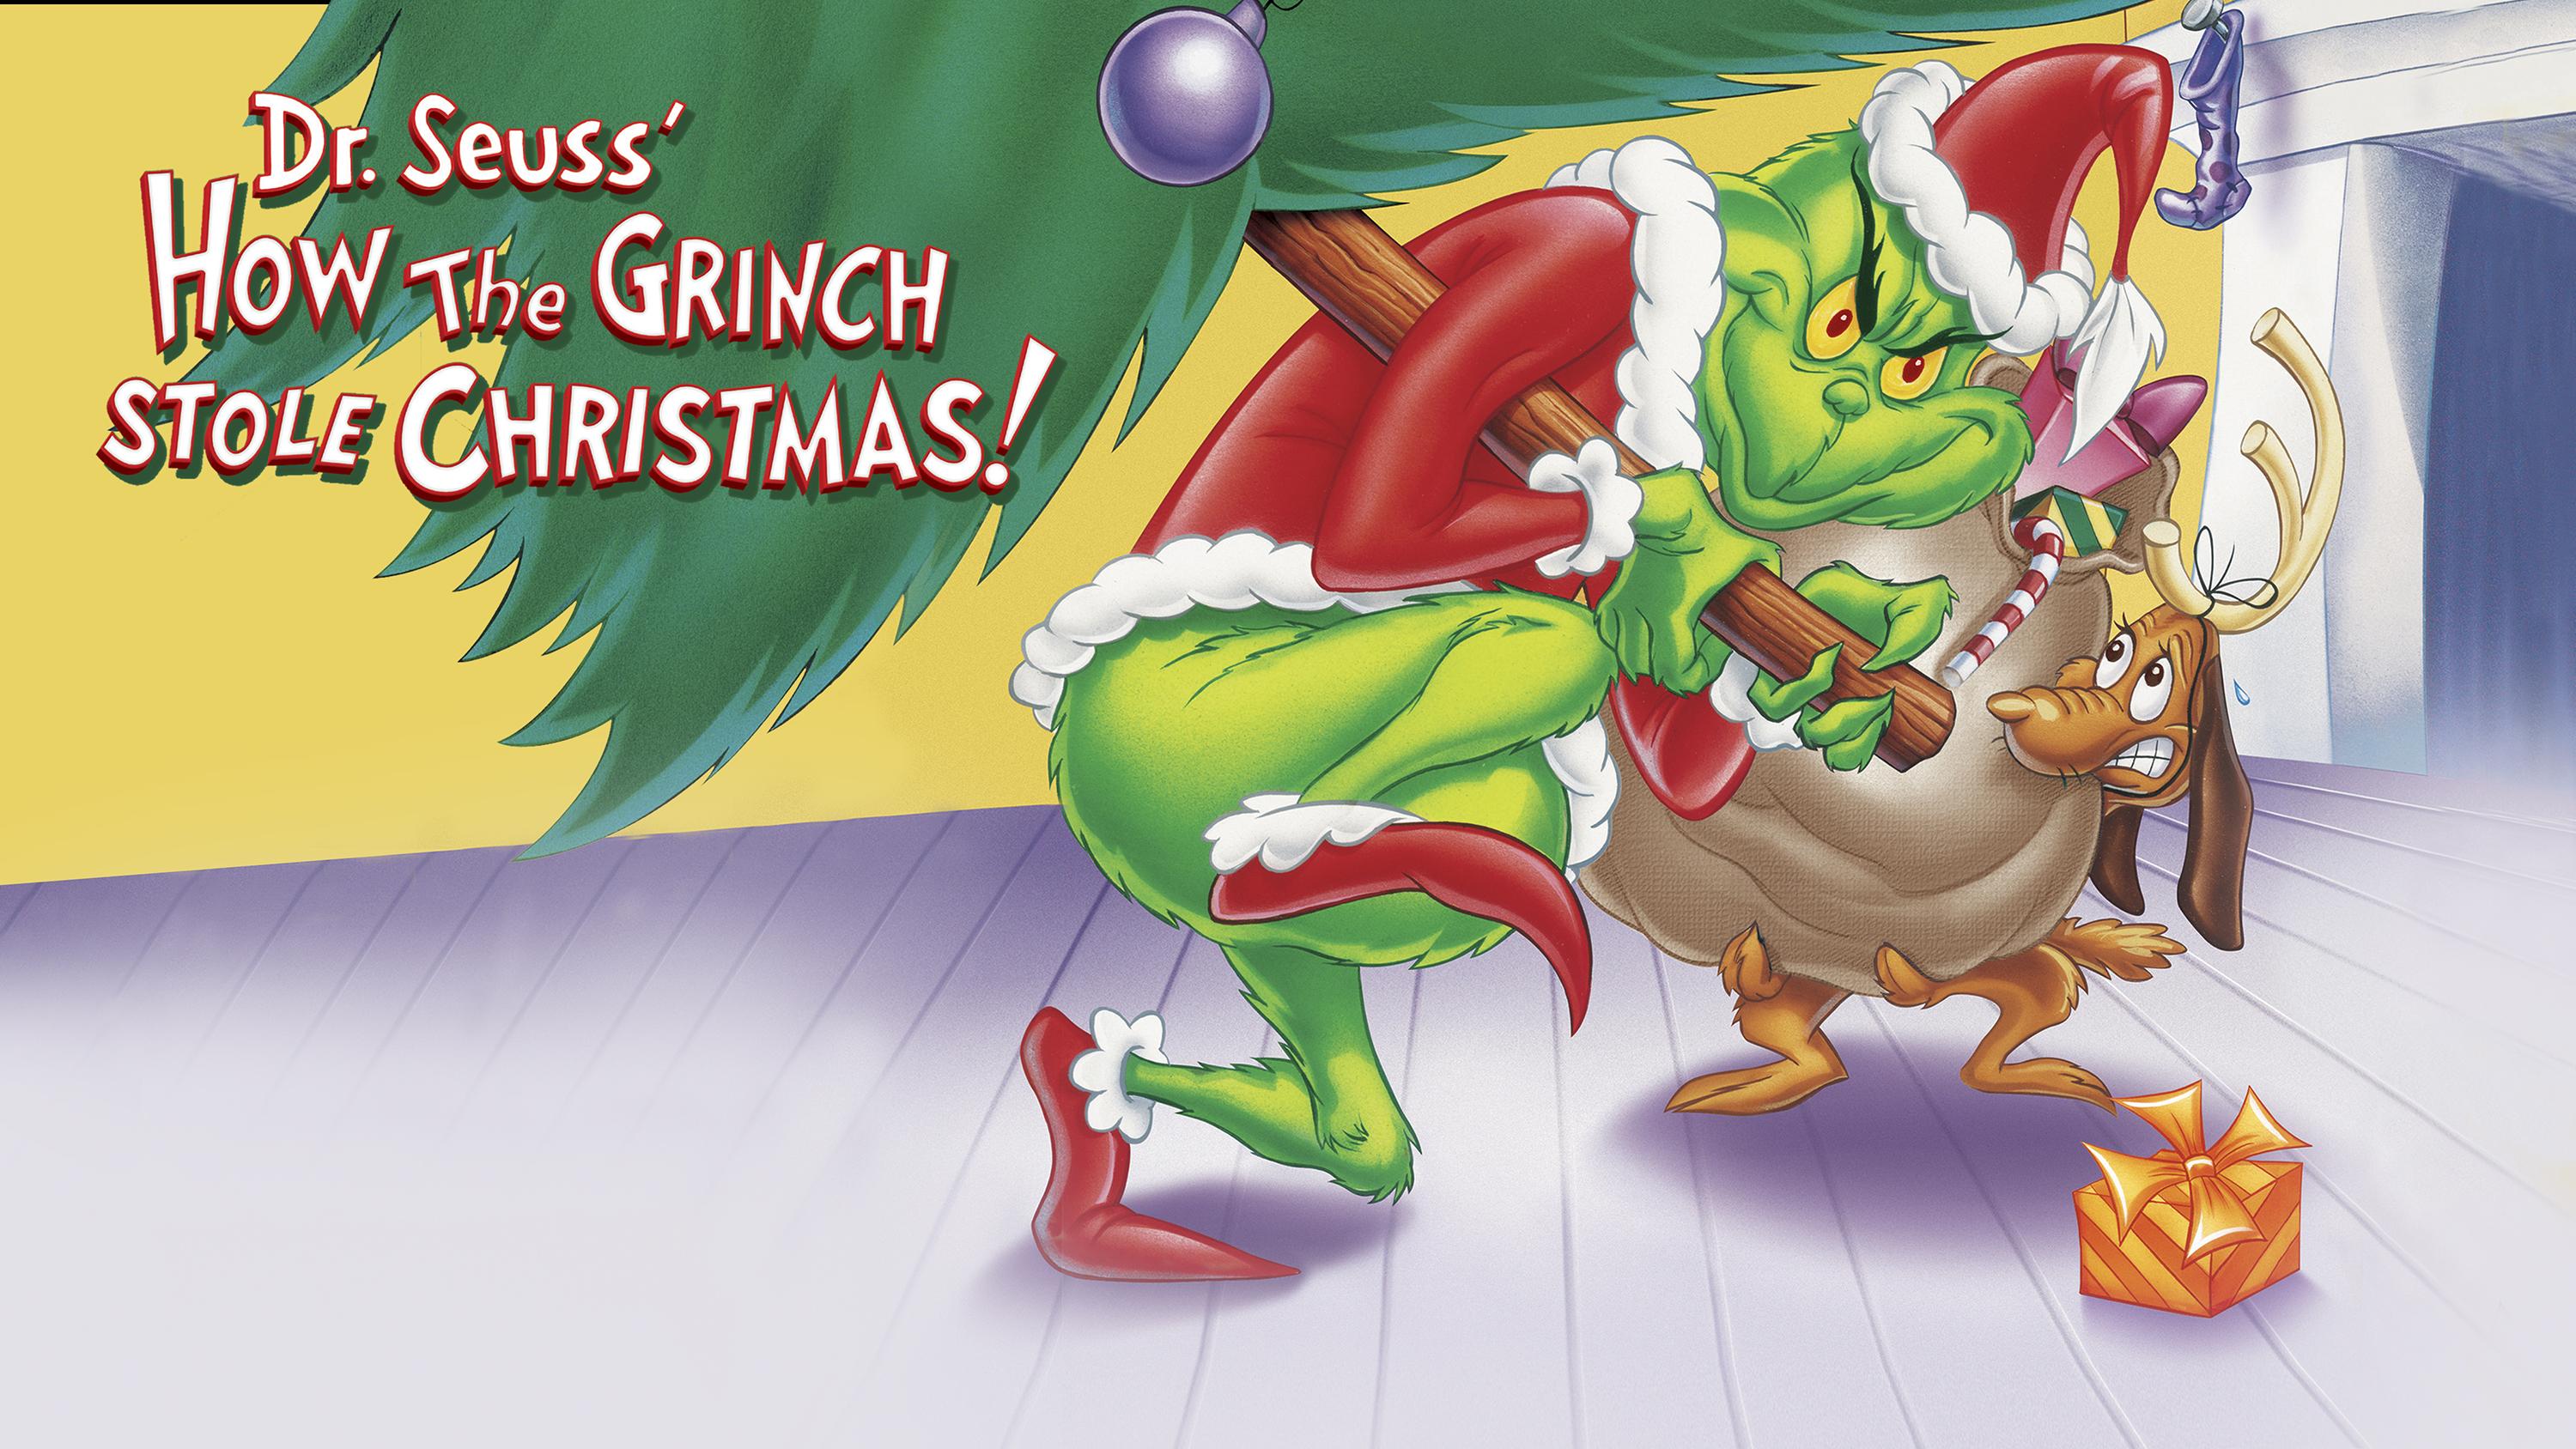 HOW THE GRINCH STOLE CHRISTMAS - Pictured: "How the Grinch Stole Christmas" Key Art - (Photo by: NBCUniversal)